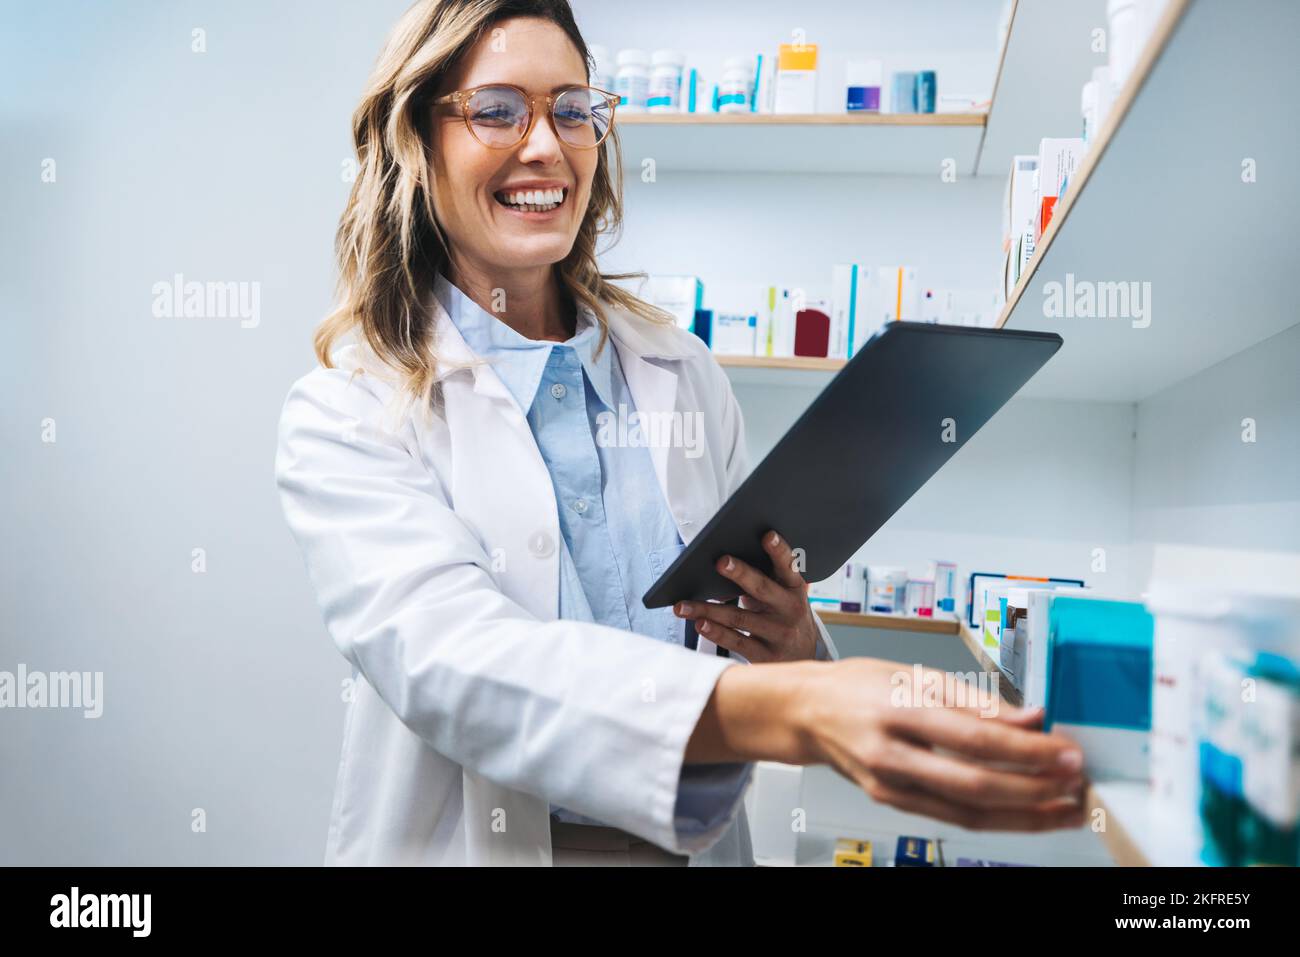 Happy pharmacist getting medication from a shelf in a chemist. Female healthcare worker filling prescriptions using a tablet. Woman working in a pharm Stock Photo